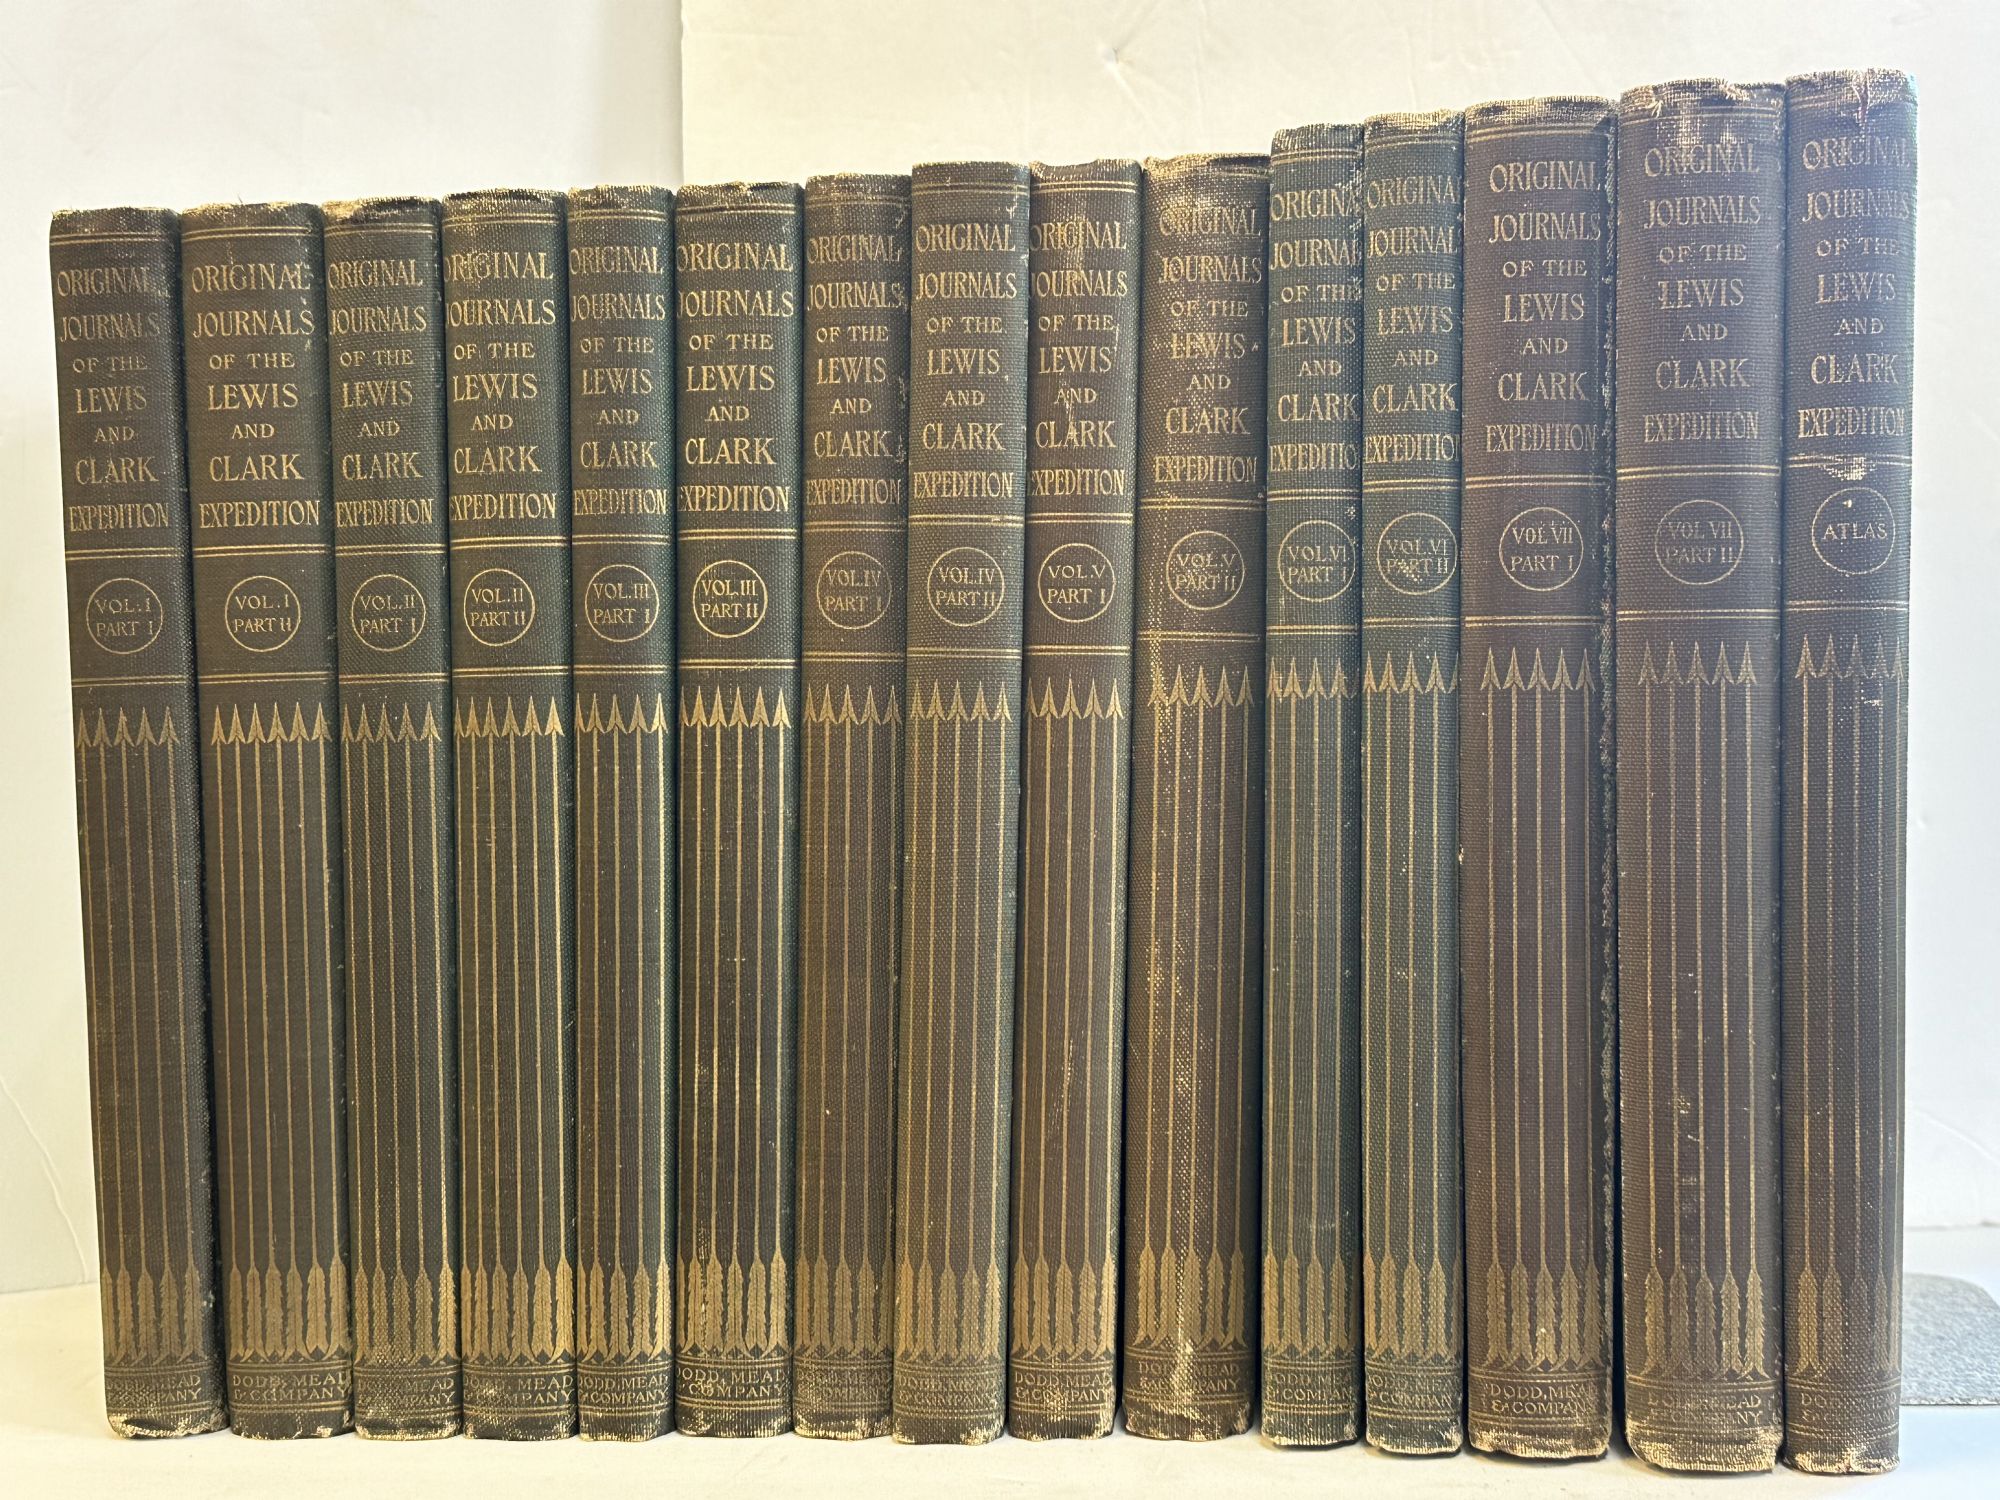 ORIGINAL JOURNALS OF THE LEWIS AND CLARK EXPEDITION 1804 1806 Fifteen  volumes Reuben Gold Thwaites Limited Edition, #46/200